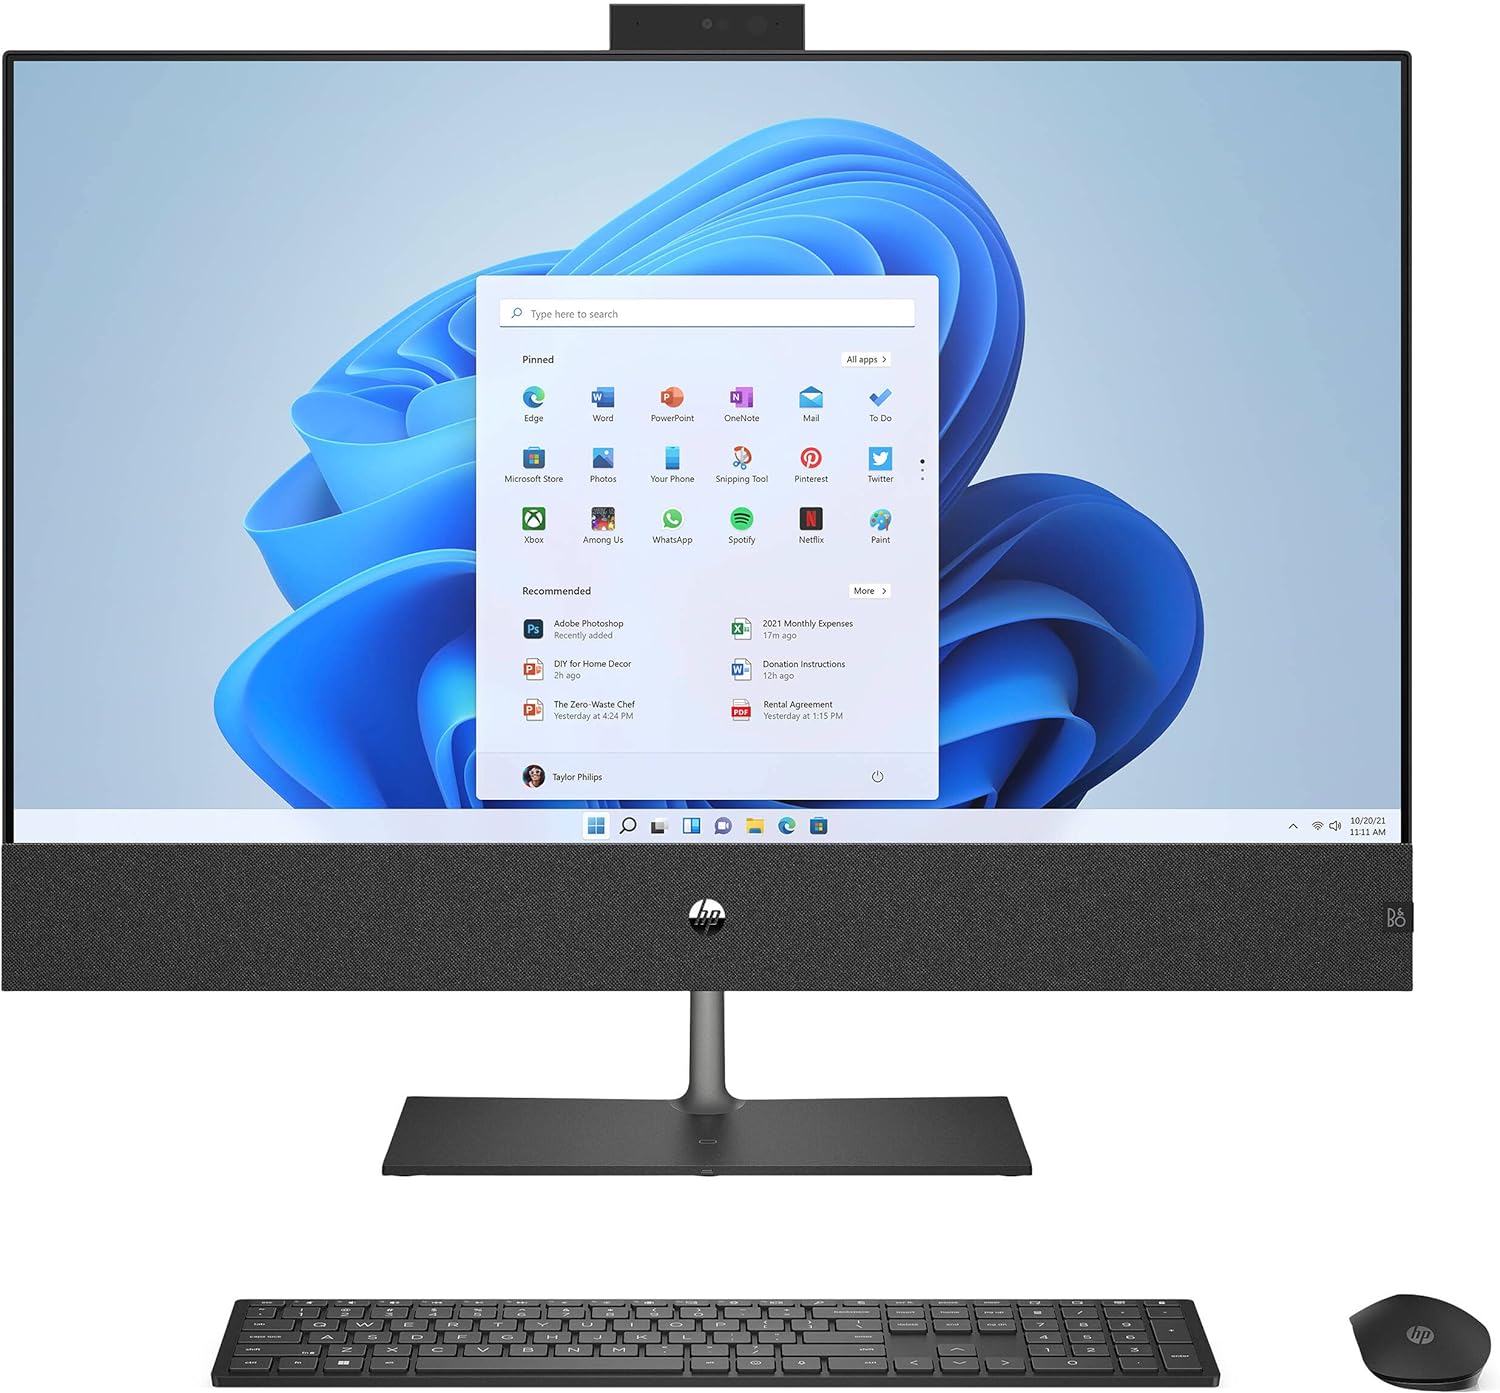 HP Pavilion 32 Desktop 1TB SSD 32GB RAM Extreme (Intel Core i9-12900K Processor with Turbo Boost to 5.20GHz, 32 GB RAM, 1 TB SSD, 31.5 4K UHD (3840x2160), Win 11) PC Computer Envy All-in-One